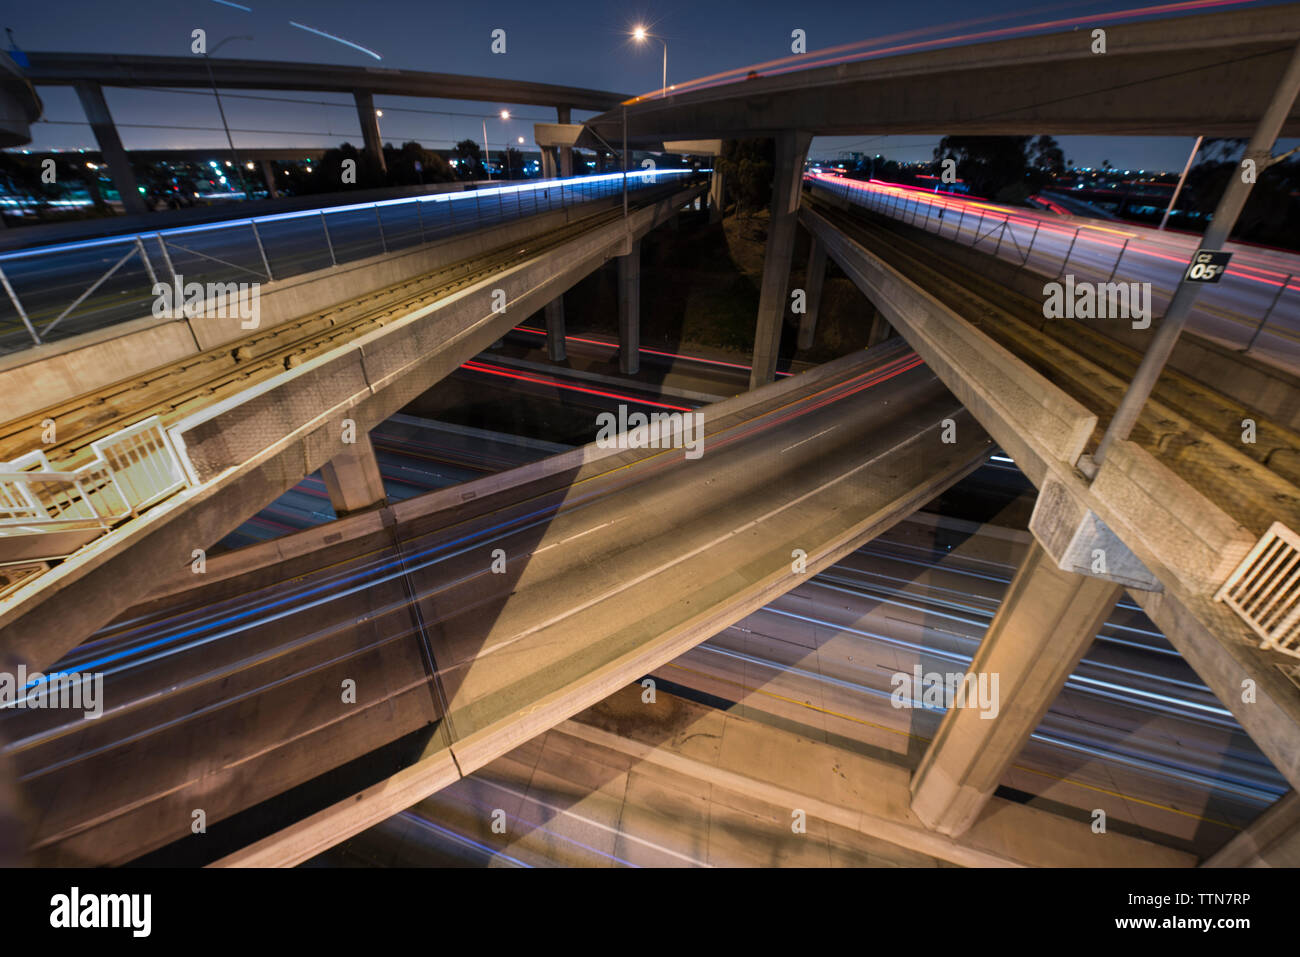 Light trails on elevated roads in city at night Stock Photo